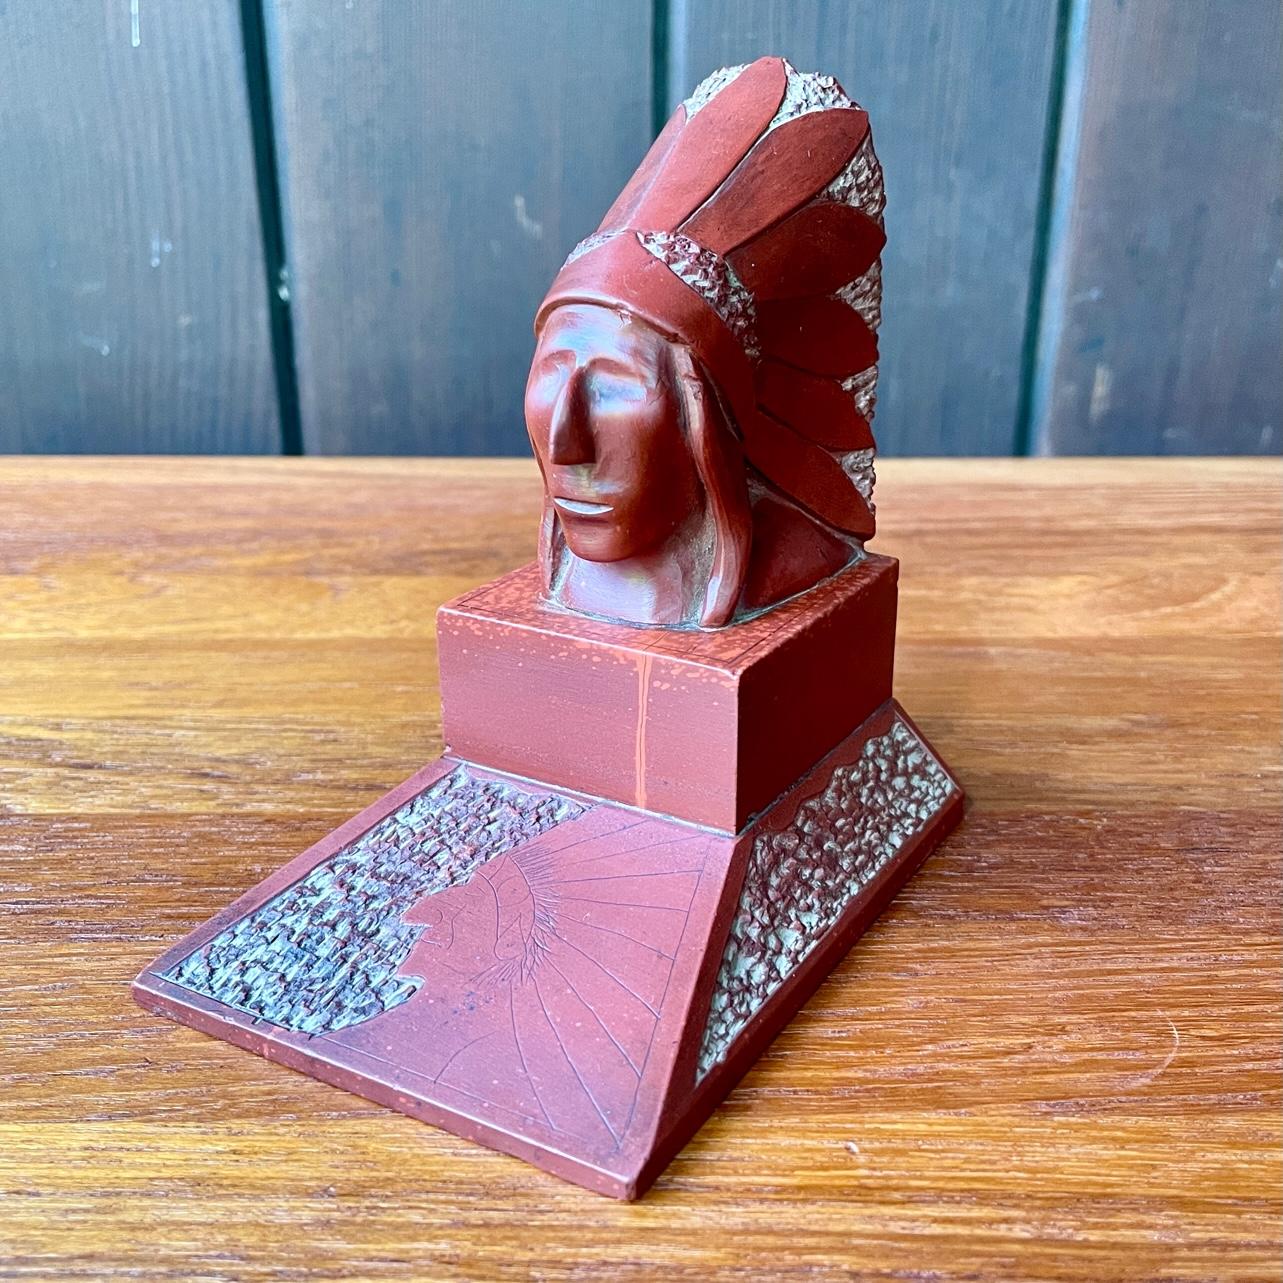 1920s Art Deco Stylized Native American Indian Vintage Table Sculpture  In Distressed Condition For Sale In Hyattsville, MD